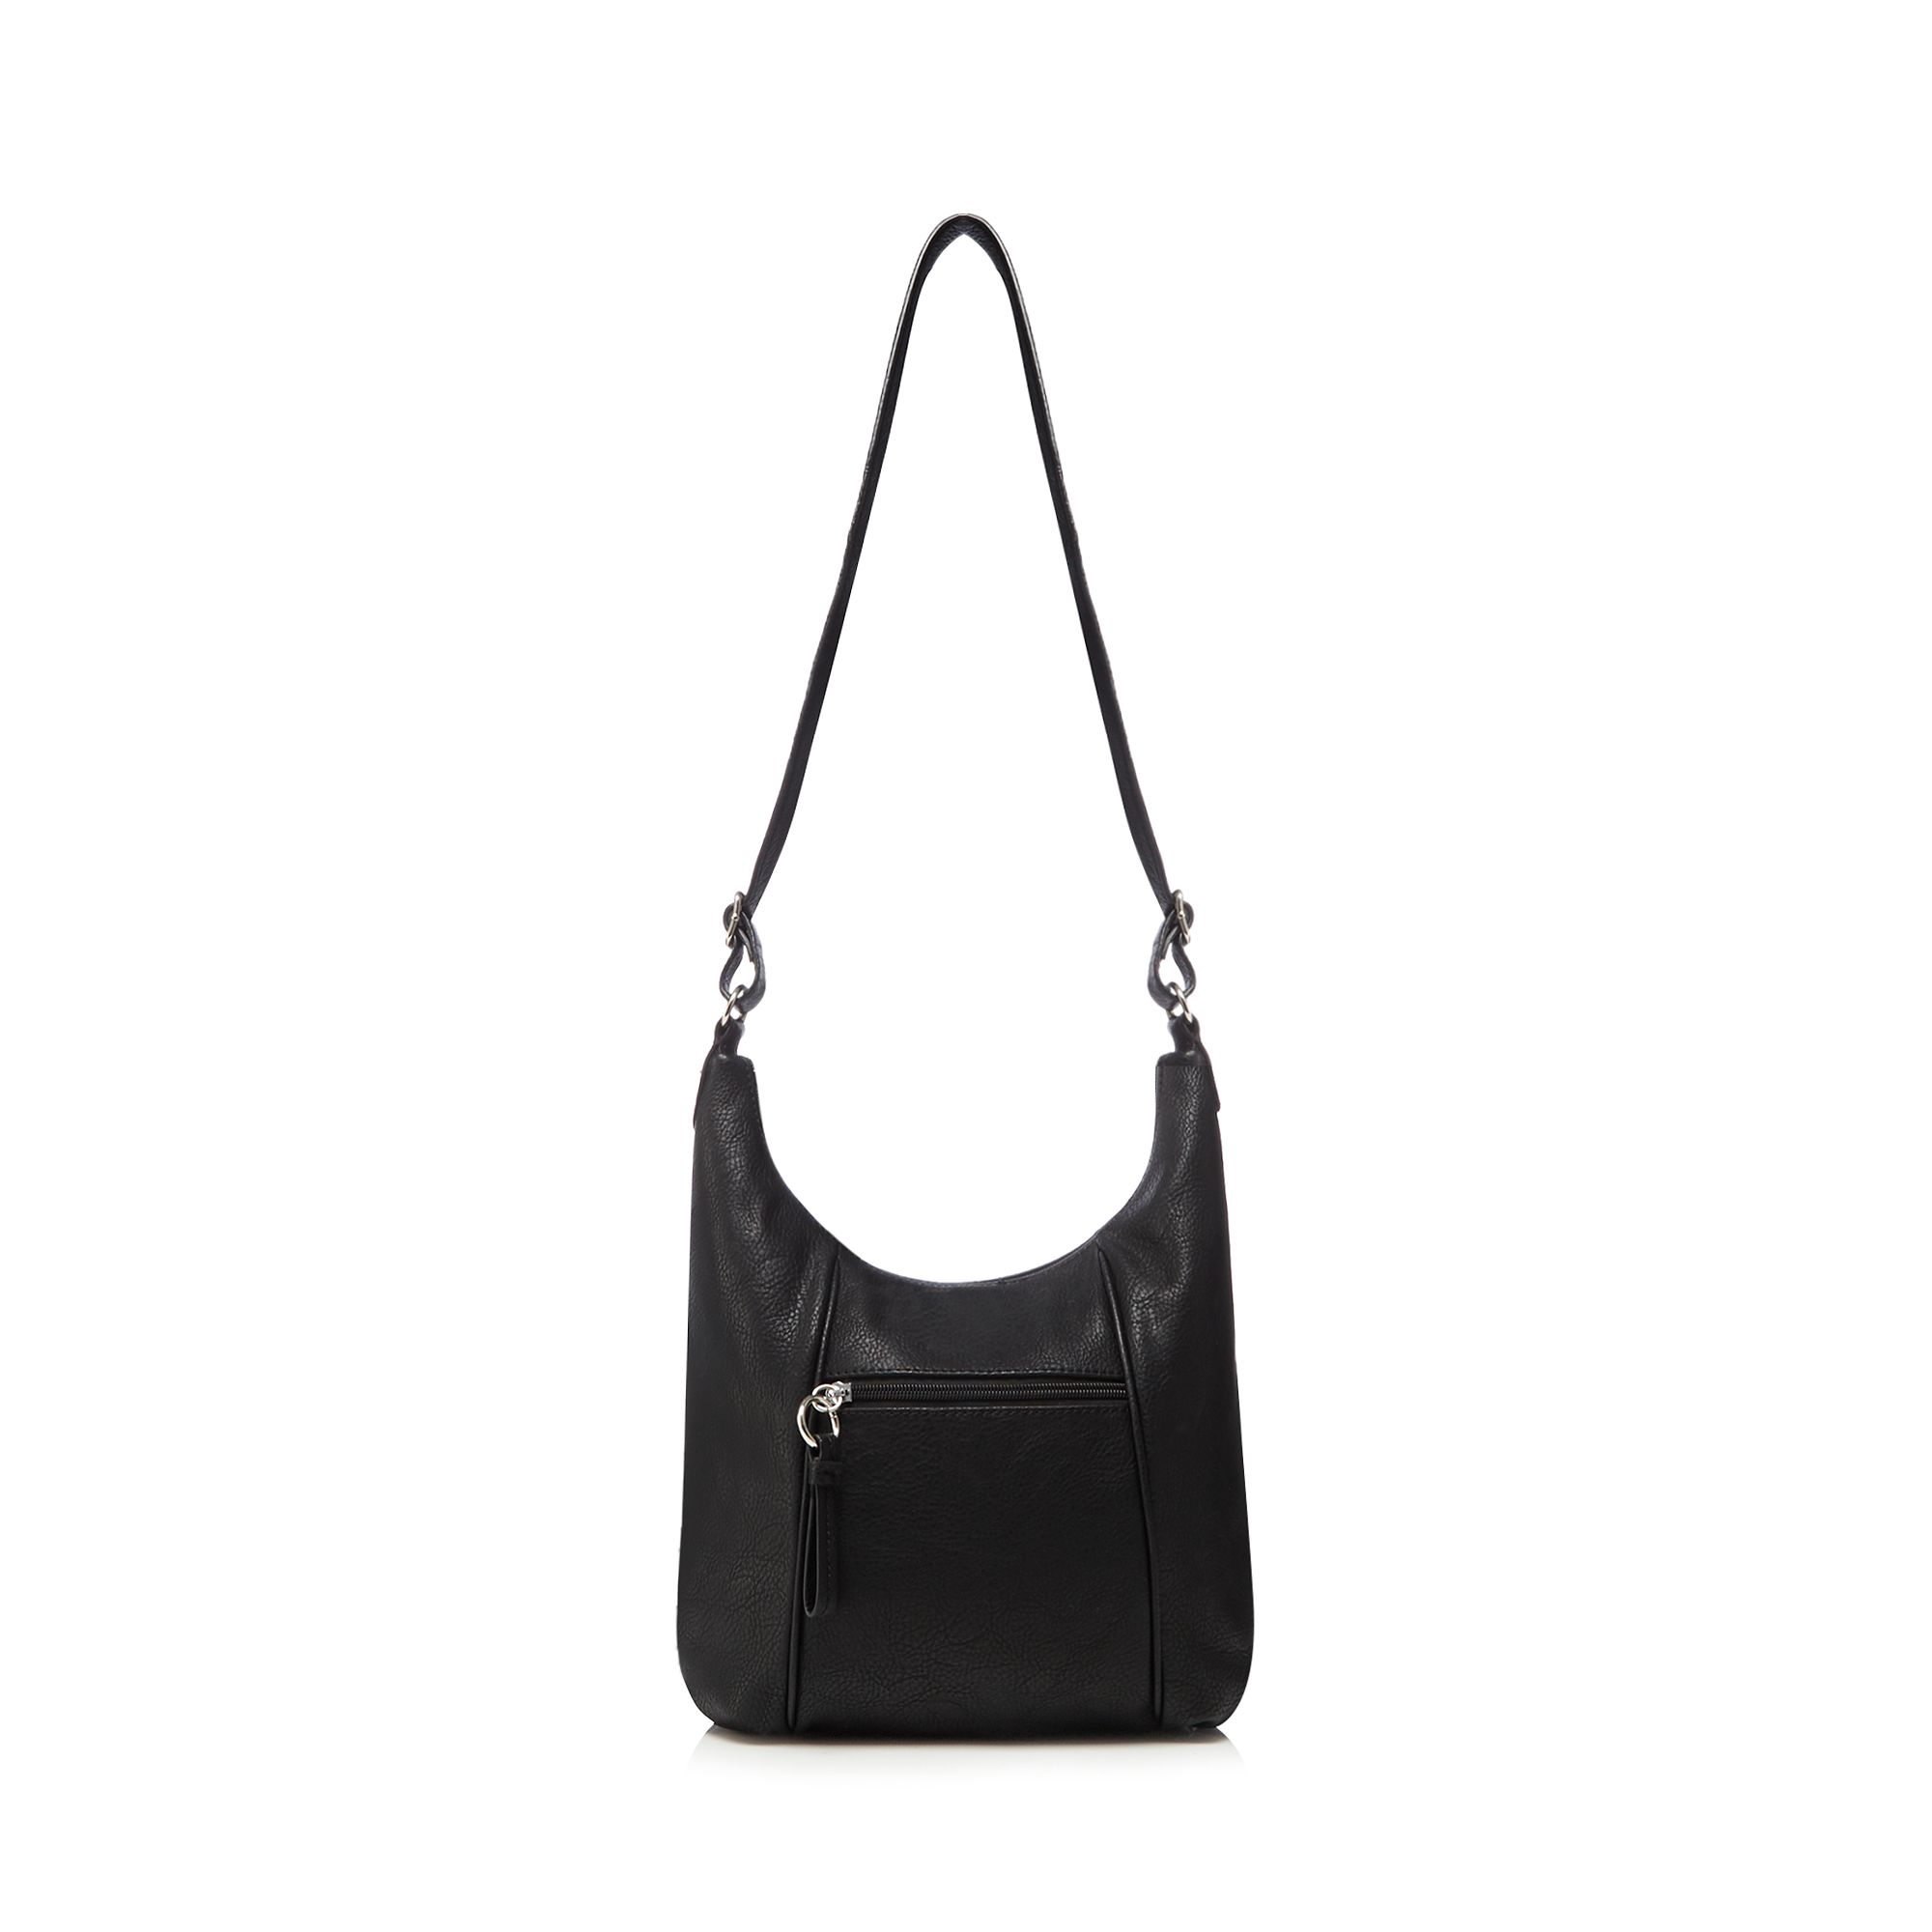 The Collection Womens Black Scooped Shoulder Bag From Debenhams | eBay